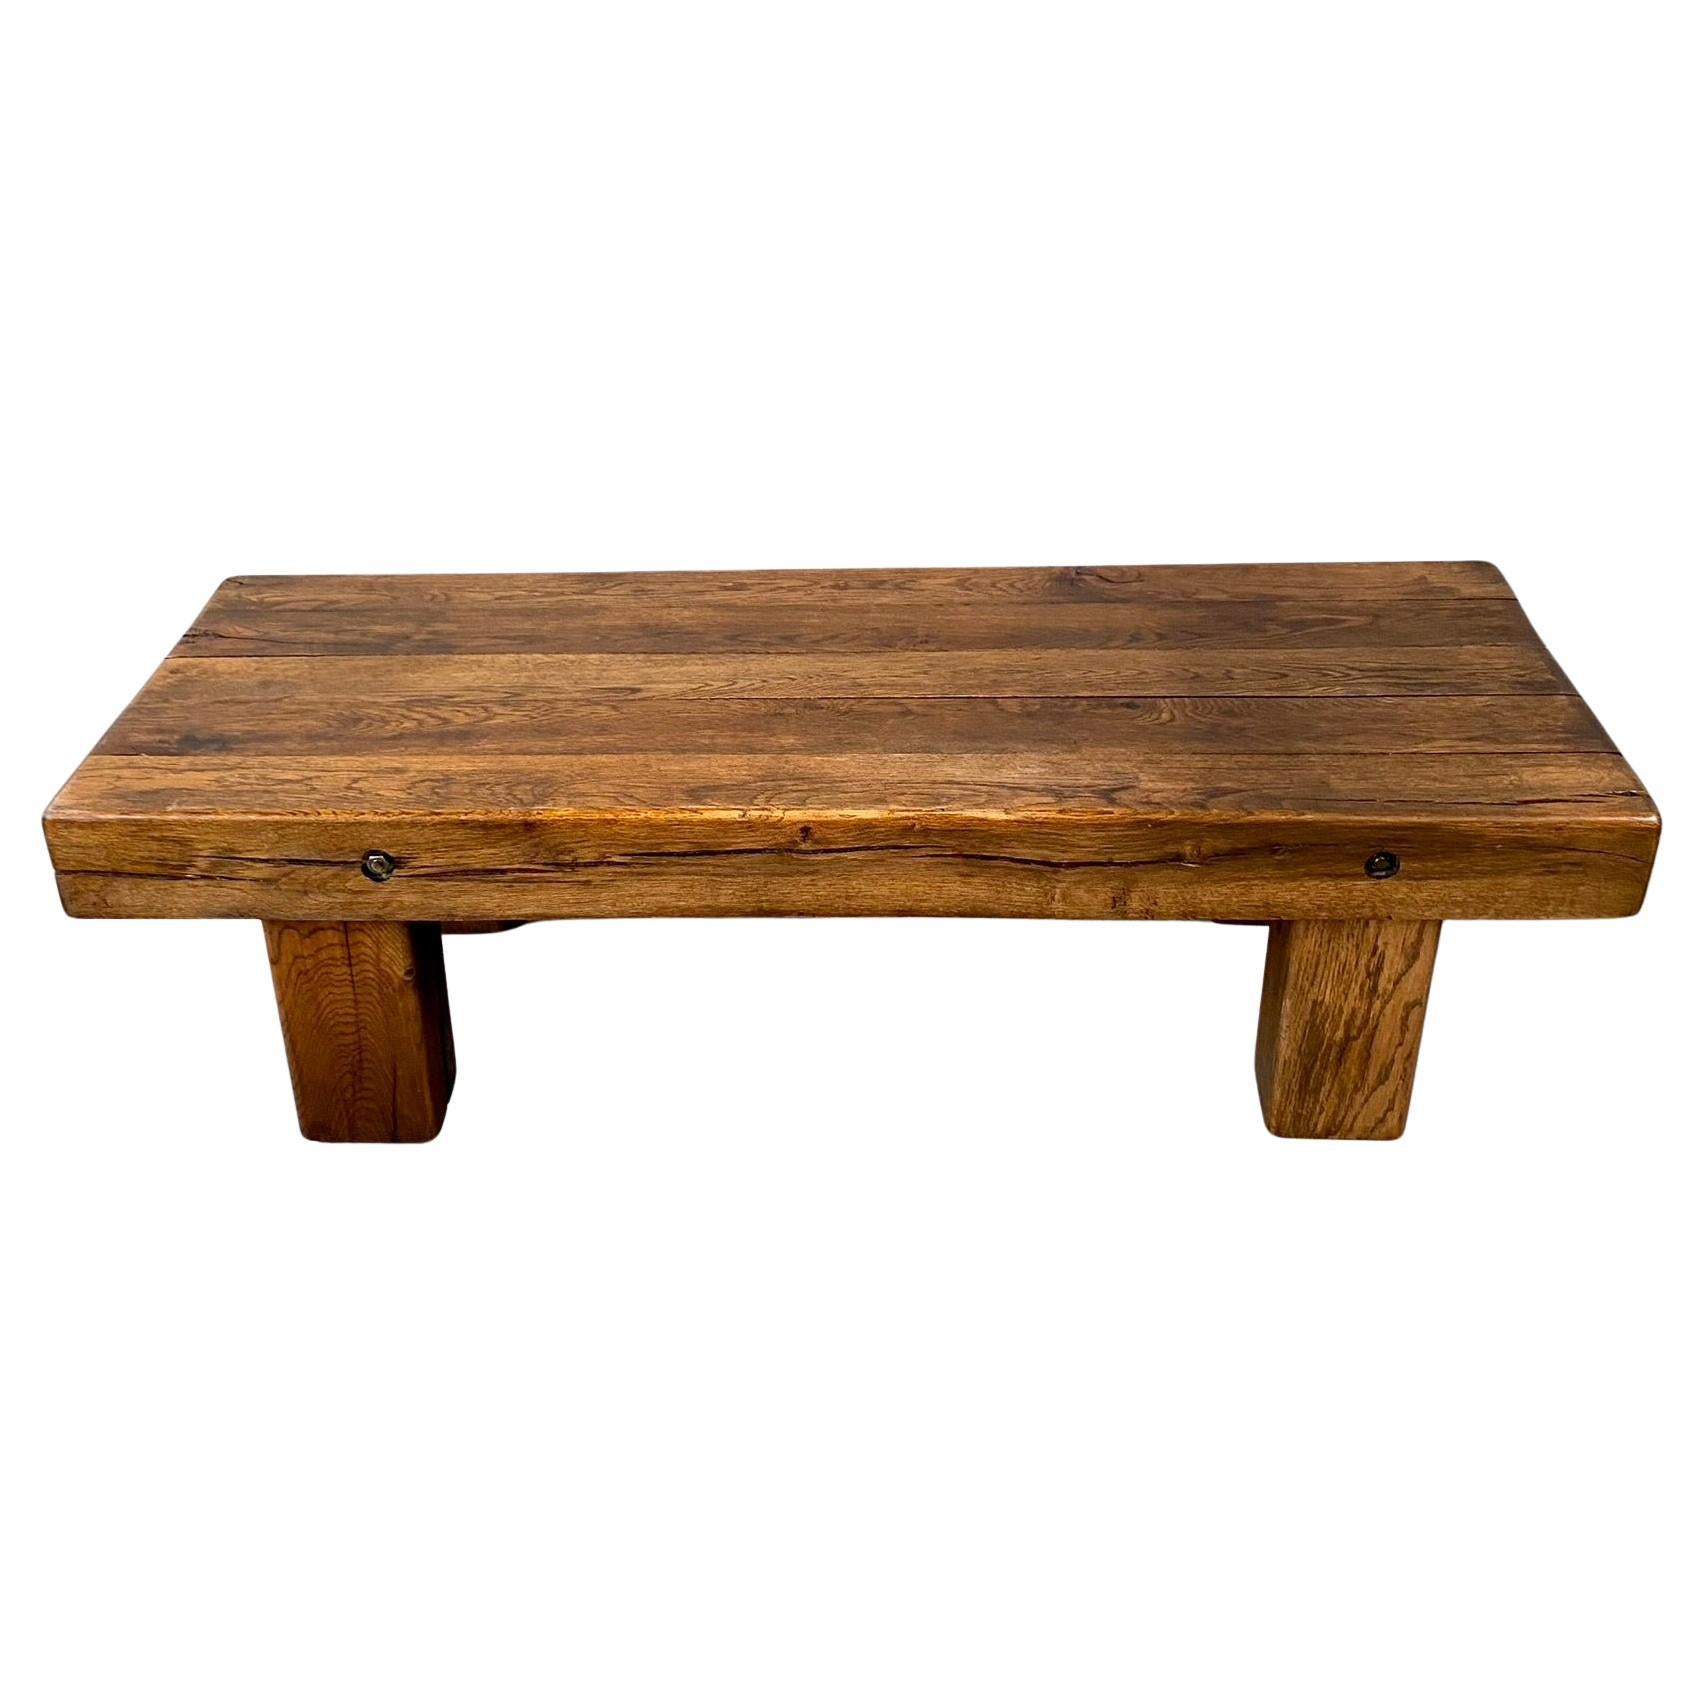 Introducing the Solid Oak Wabi Sabi Brutalist Coffee Table, a timeless piece originating from 1960s France. This exquisite table seamlessly blends rustic charm with a modern aesthetic, making it an ideal addition to interiors characterized by